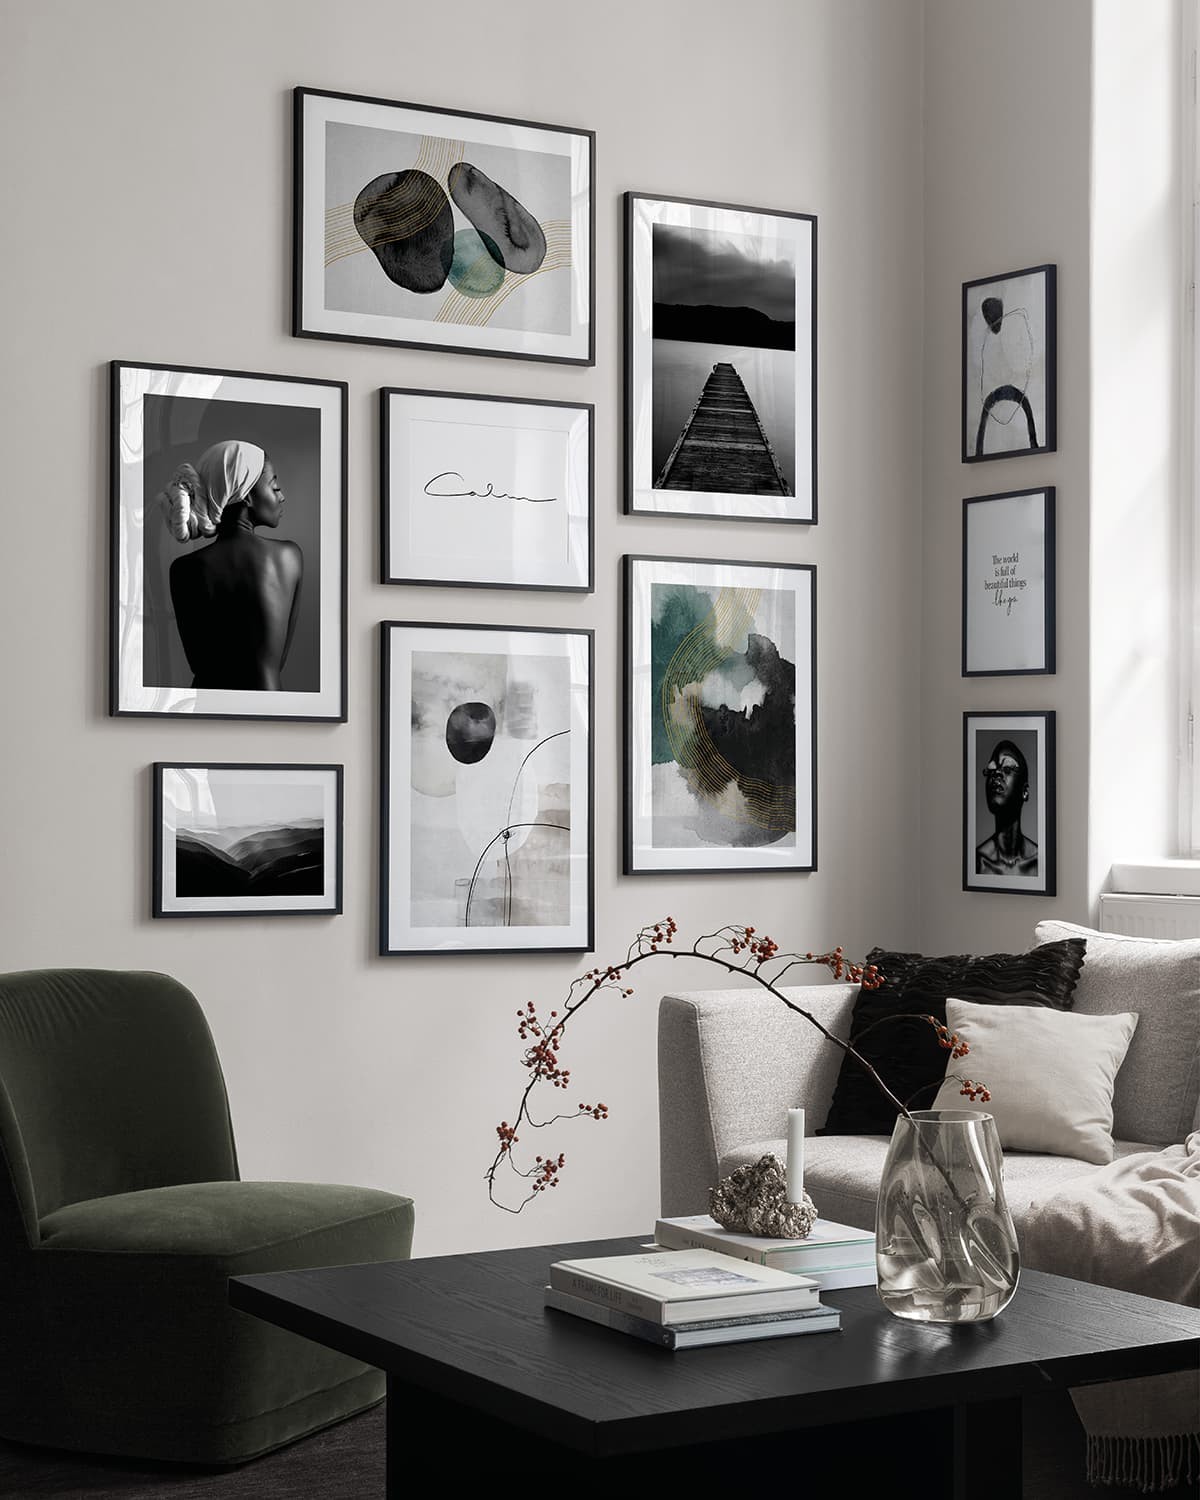 think black frame gallery wall with black and white desenio artworks wrapping around corner